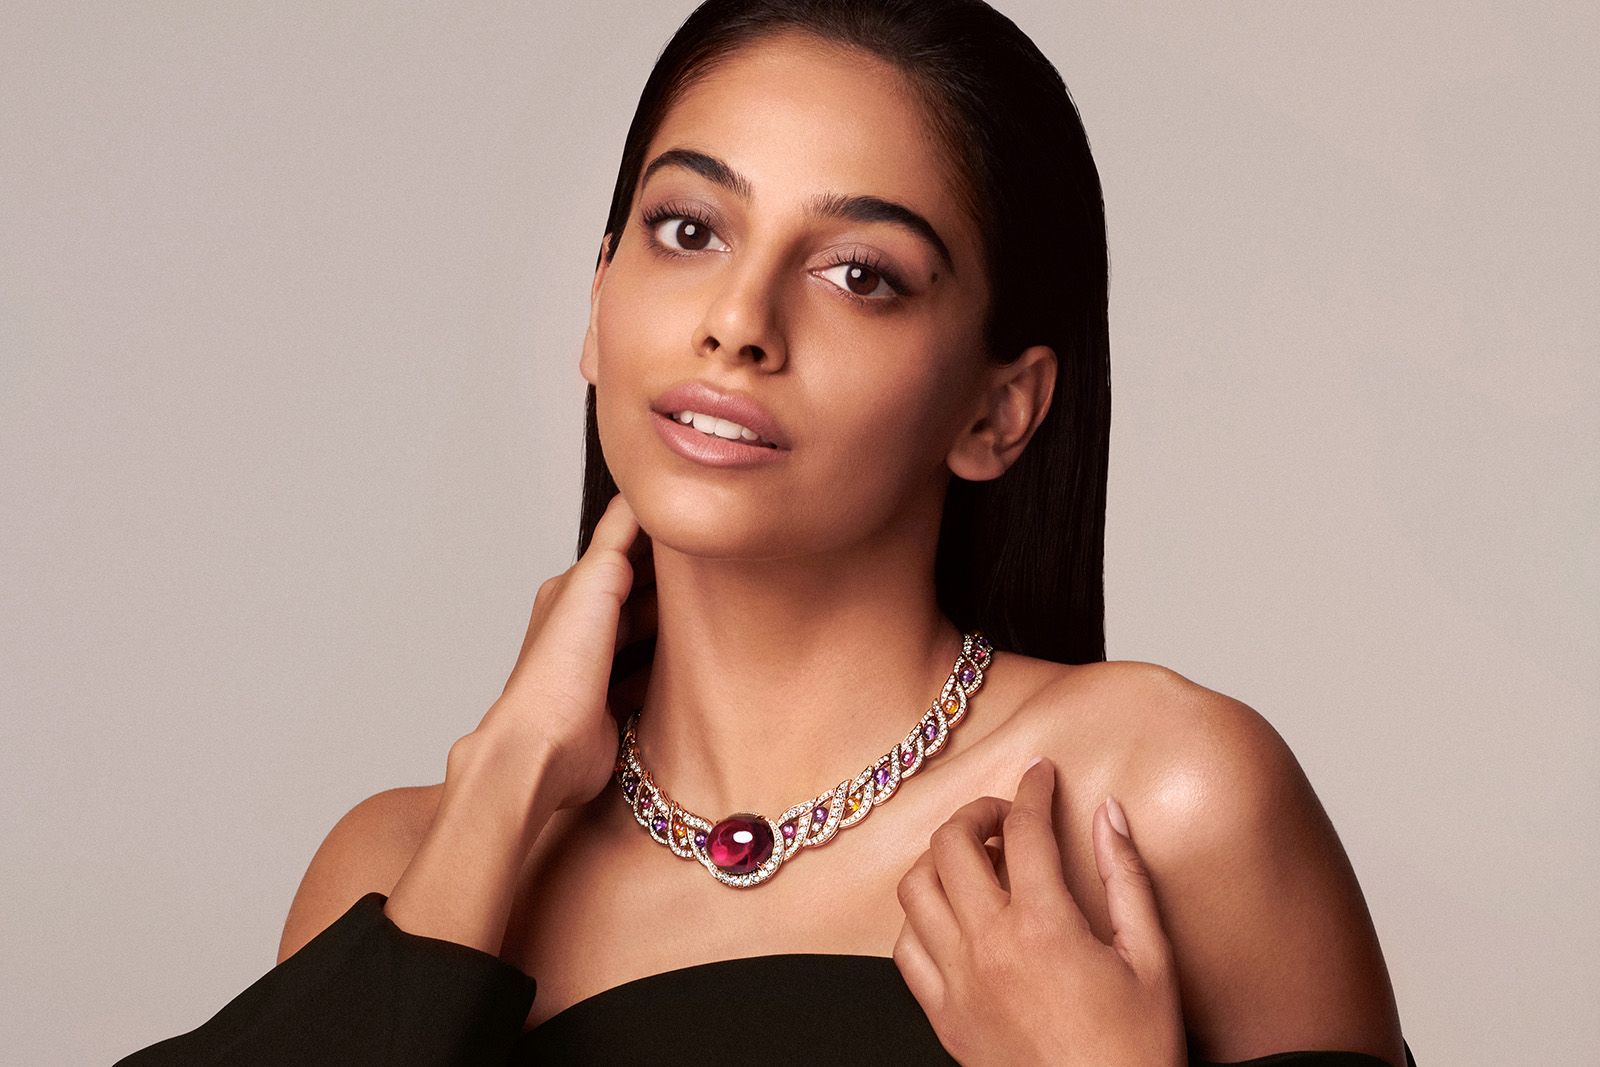 Bvlgari introduces its new High Jewellery collection, Magnifica